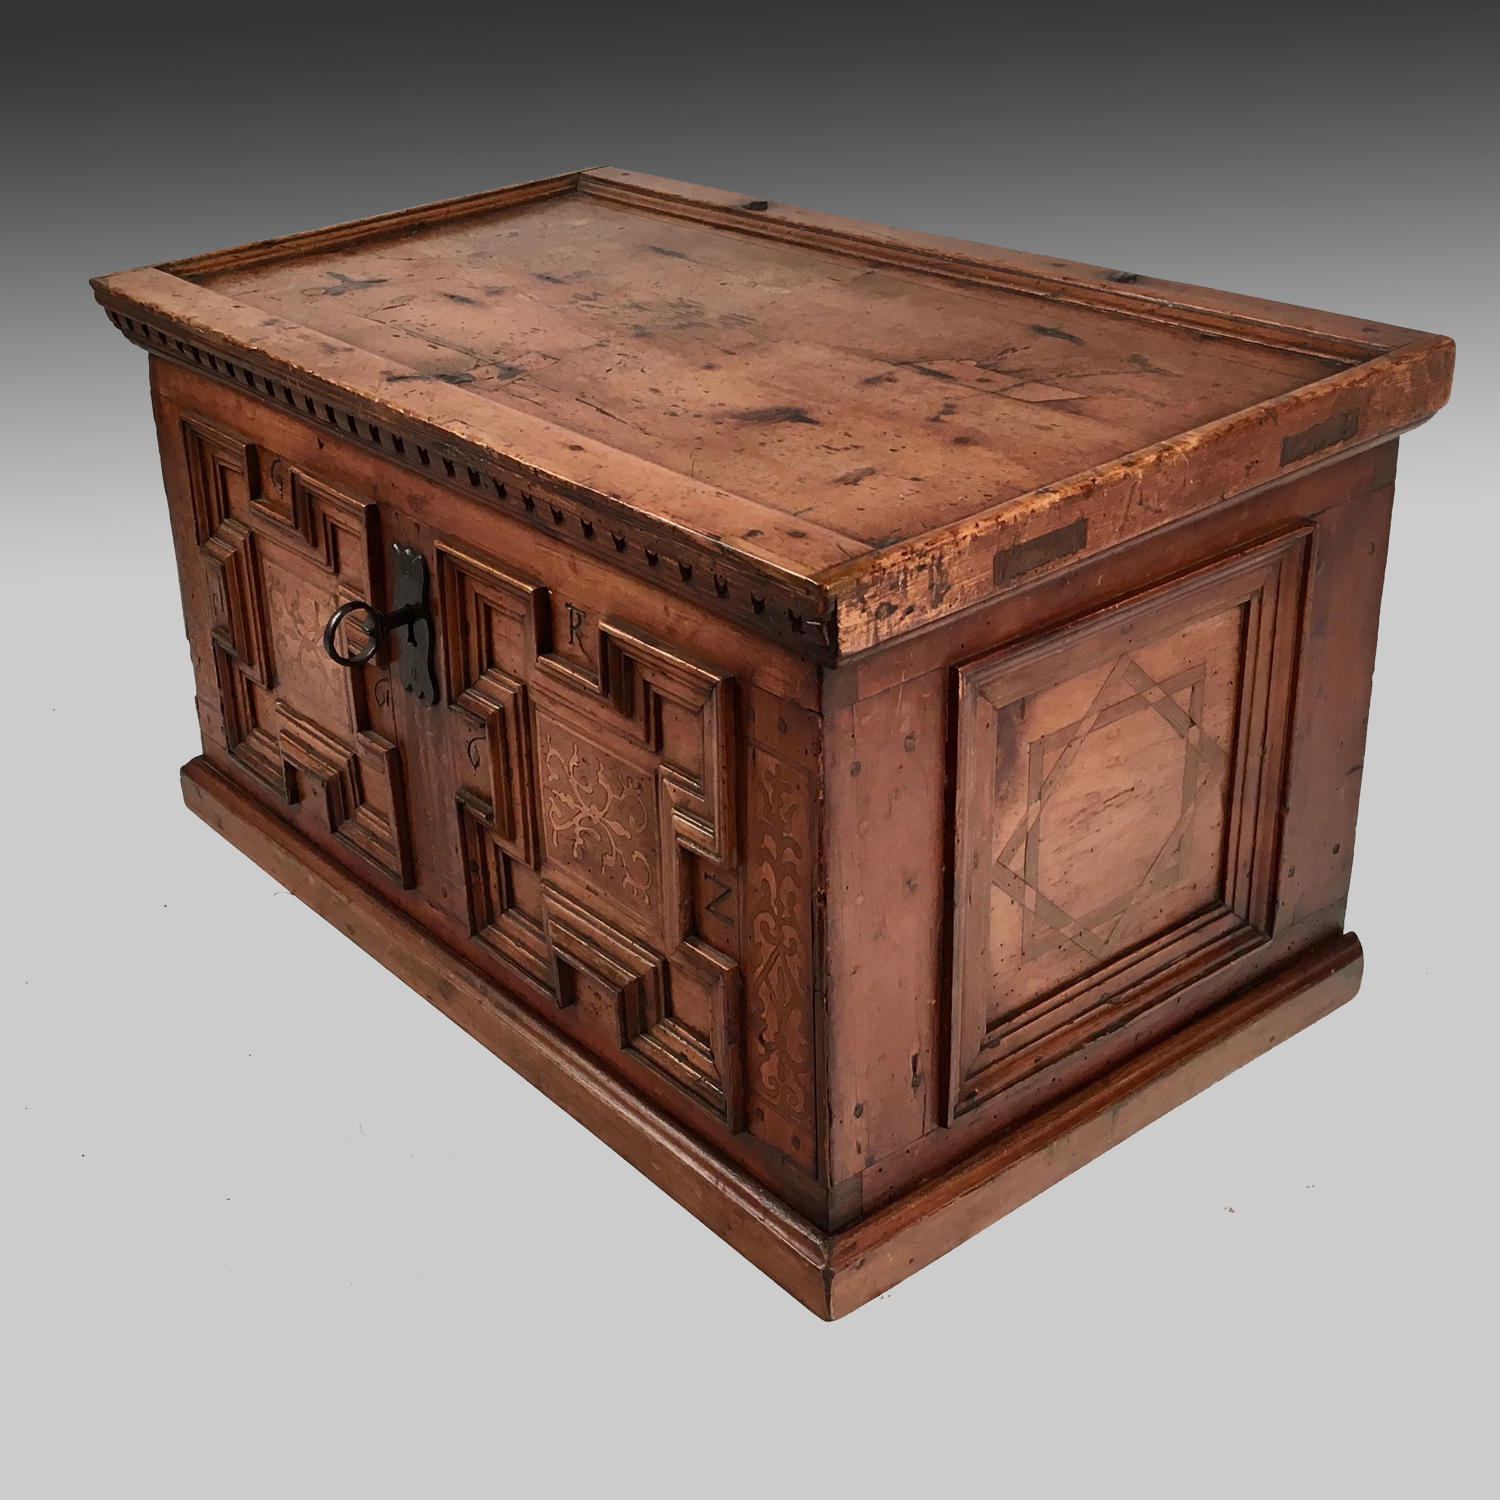 17th century Swiss dowry chest or coffre-fort